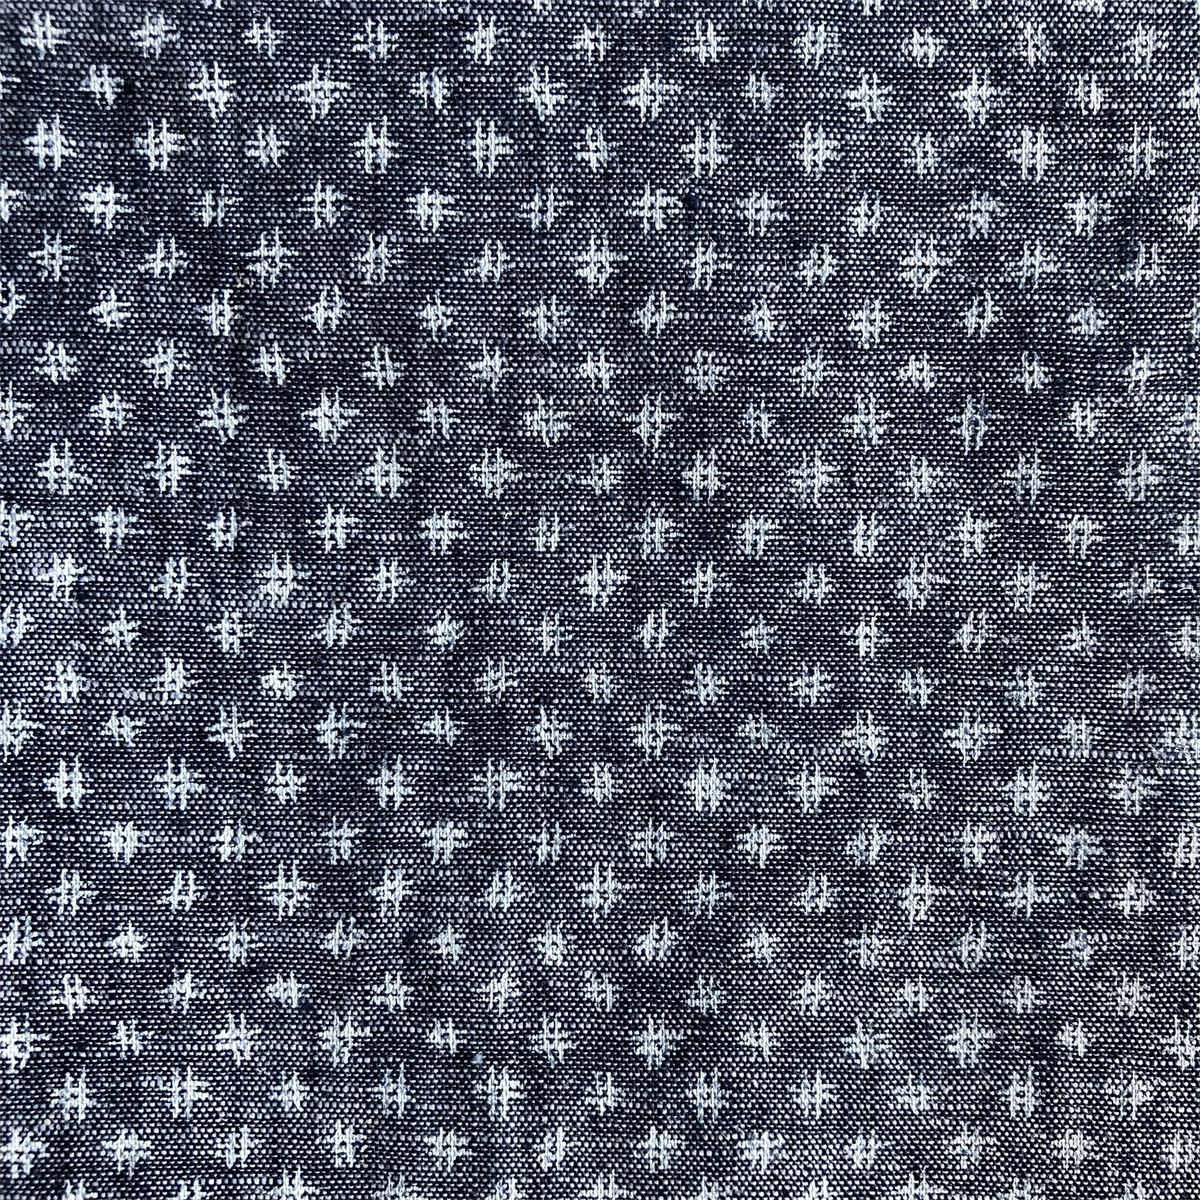 Linen Cotton Printed Fabric for men's shirts 55%linen 45%cotton printed chambray background woven fabric